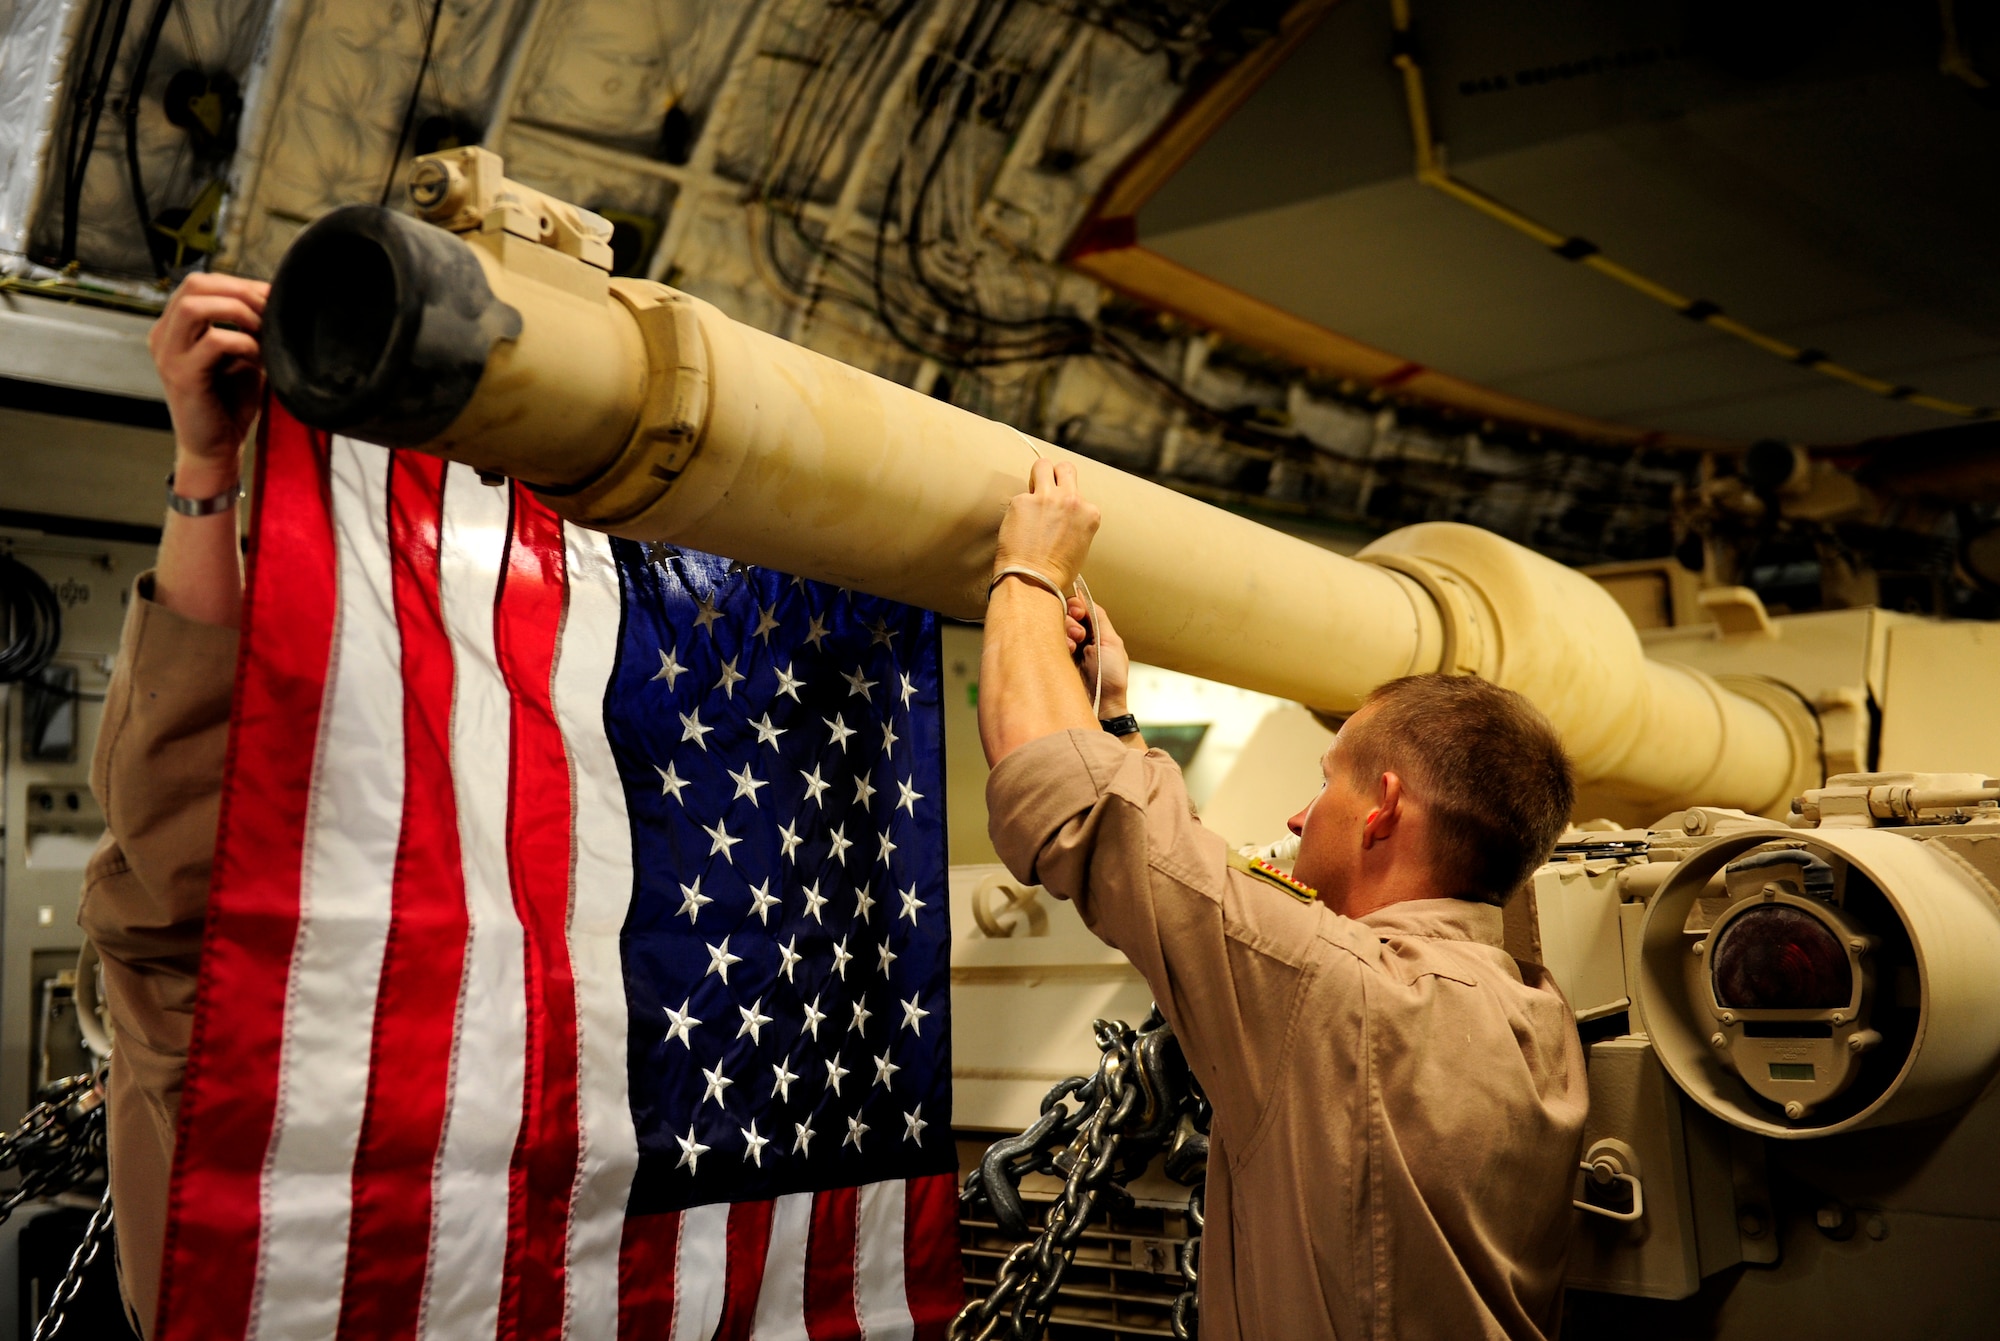 U.S. Air Force C-17 Globemaster III aircraft crew members assigned to the 816th Expeditionary Airlift Squadron at a non-disclosed base in Southwest Asia, tie an American flag onto a Marine Corps M1A1 Abrams tank during an air transport to Afghanistan in support of Operation Enduring Freedom on Nov. 28, 2010. (U.S. Air Force Photo/Staff Sgt. Andy M. Kin)